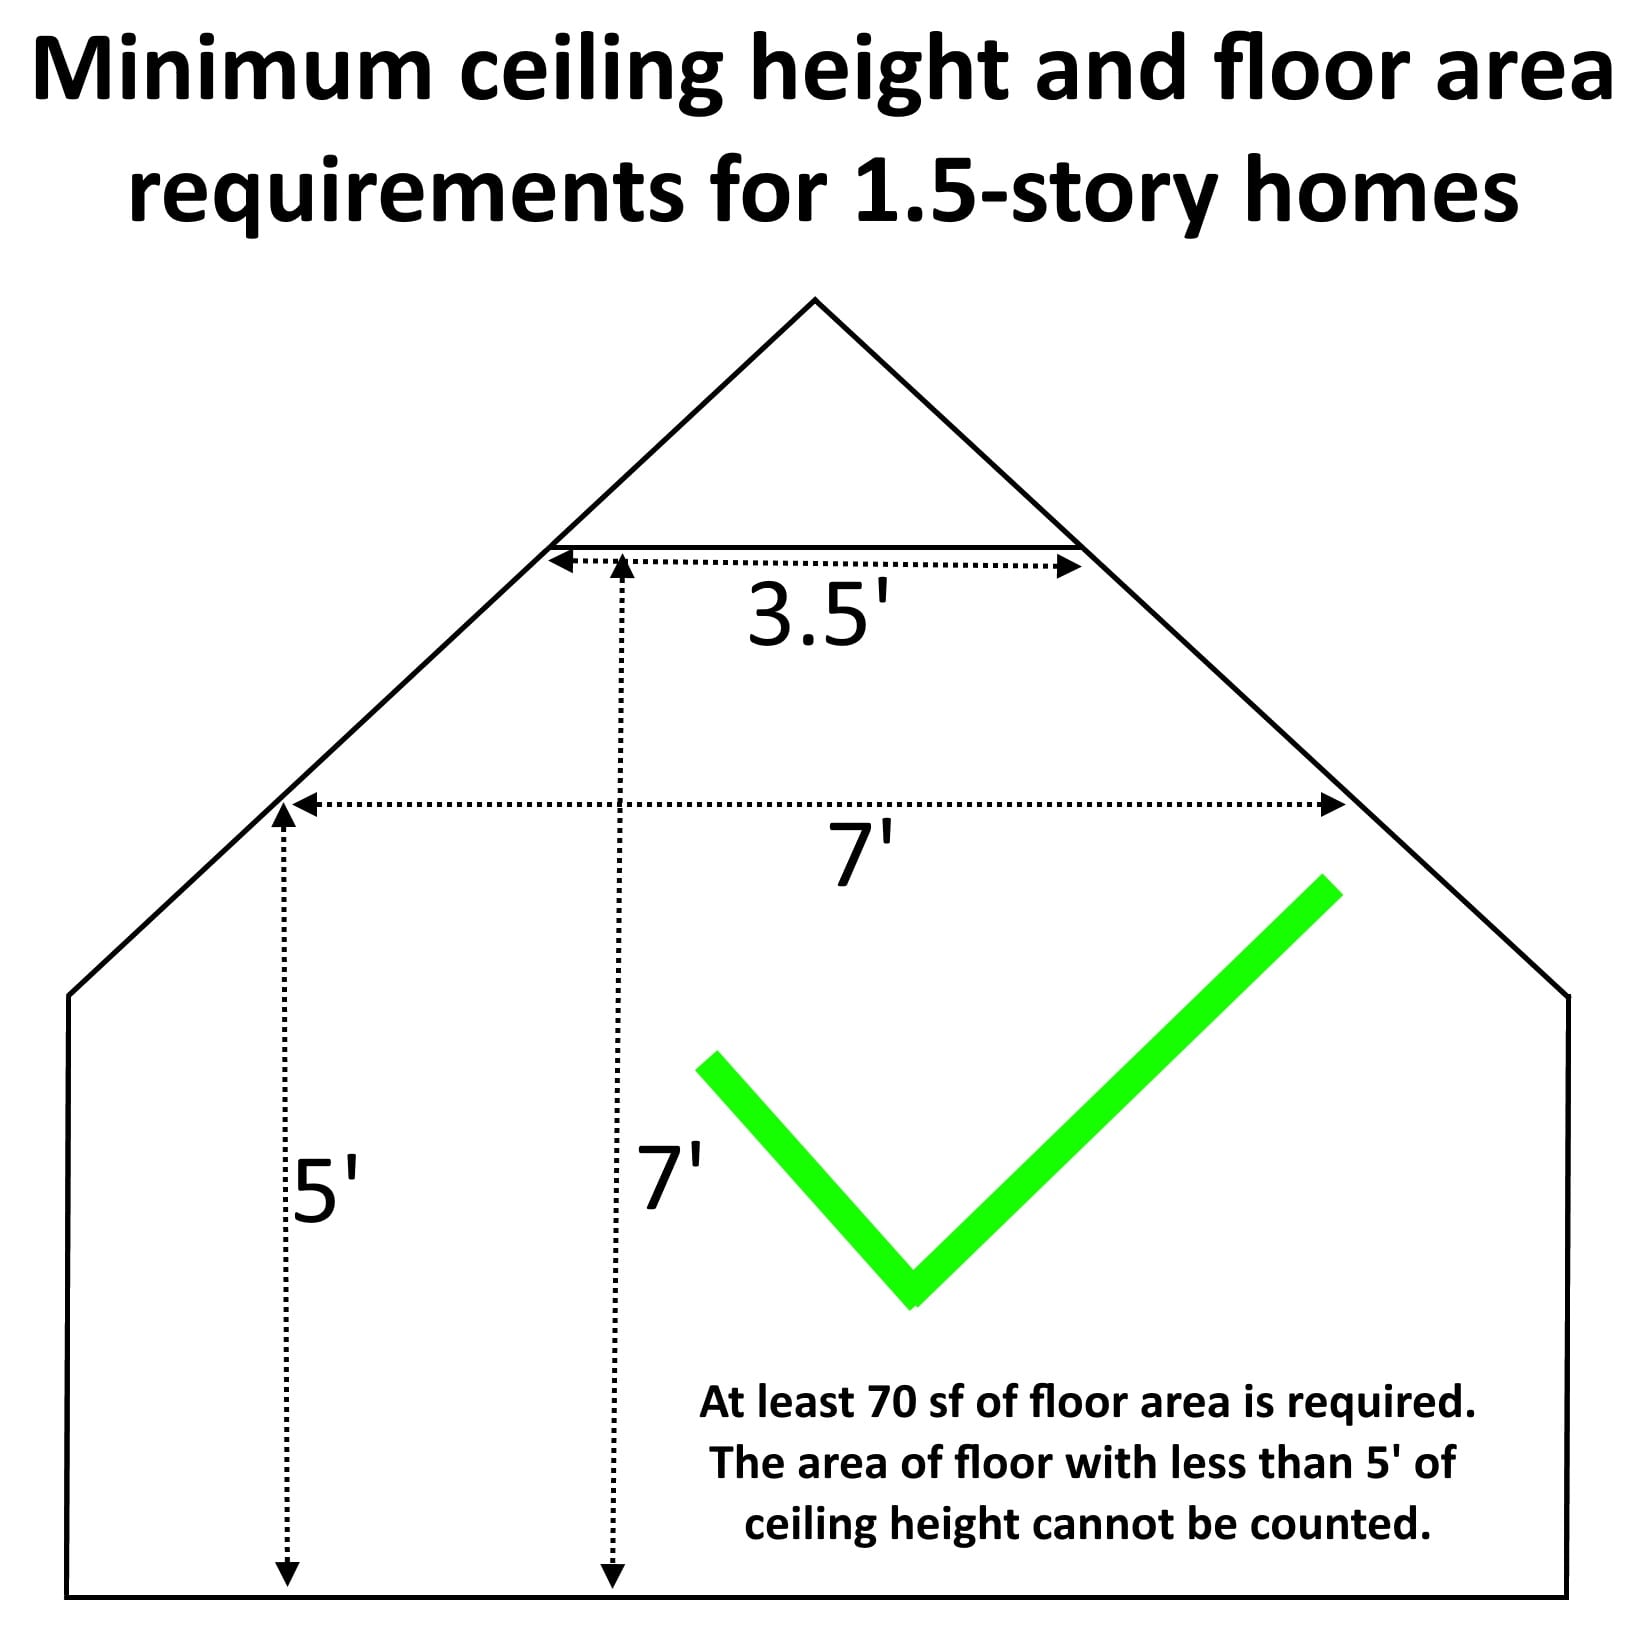 Bedroom Ceiling Height And Floor Area Requirements For 1 5